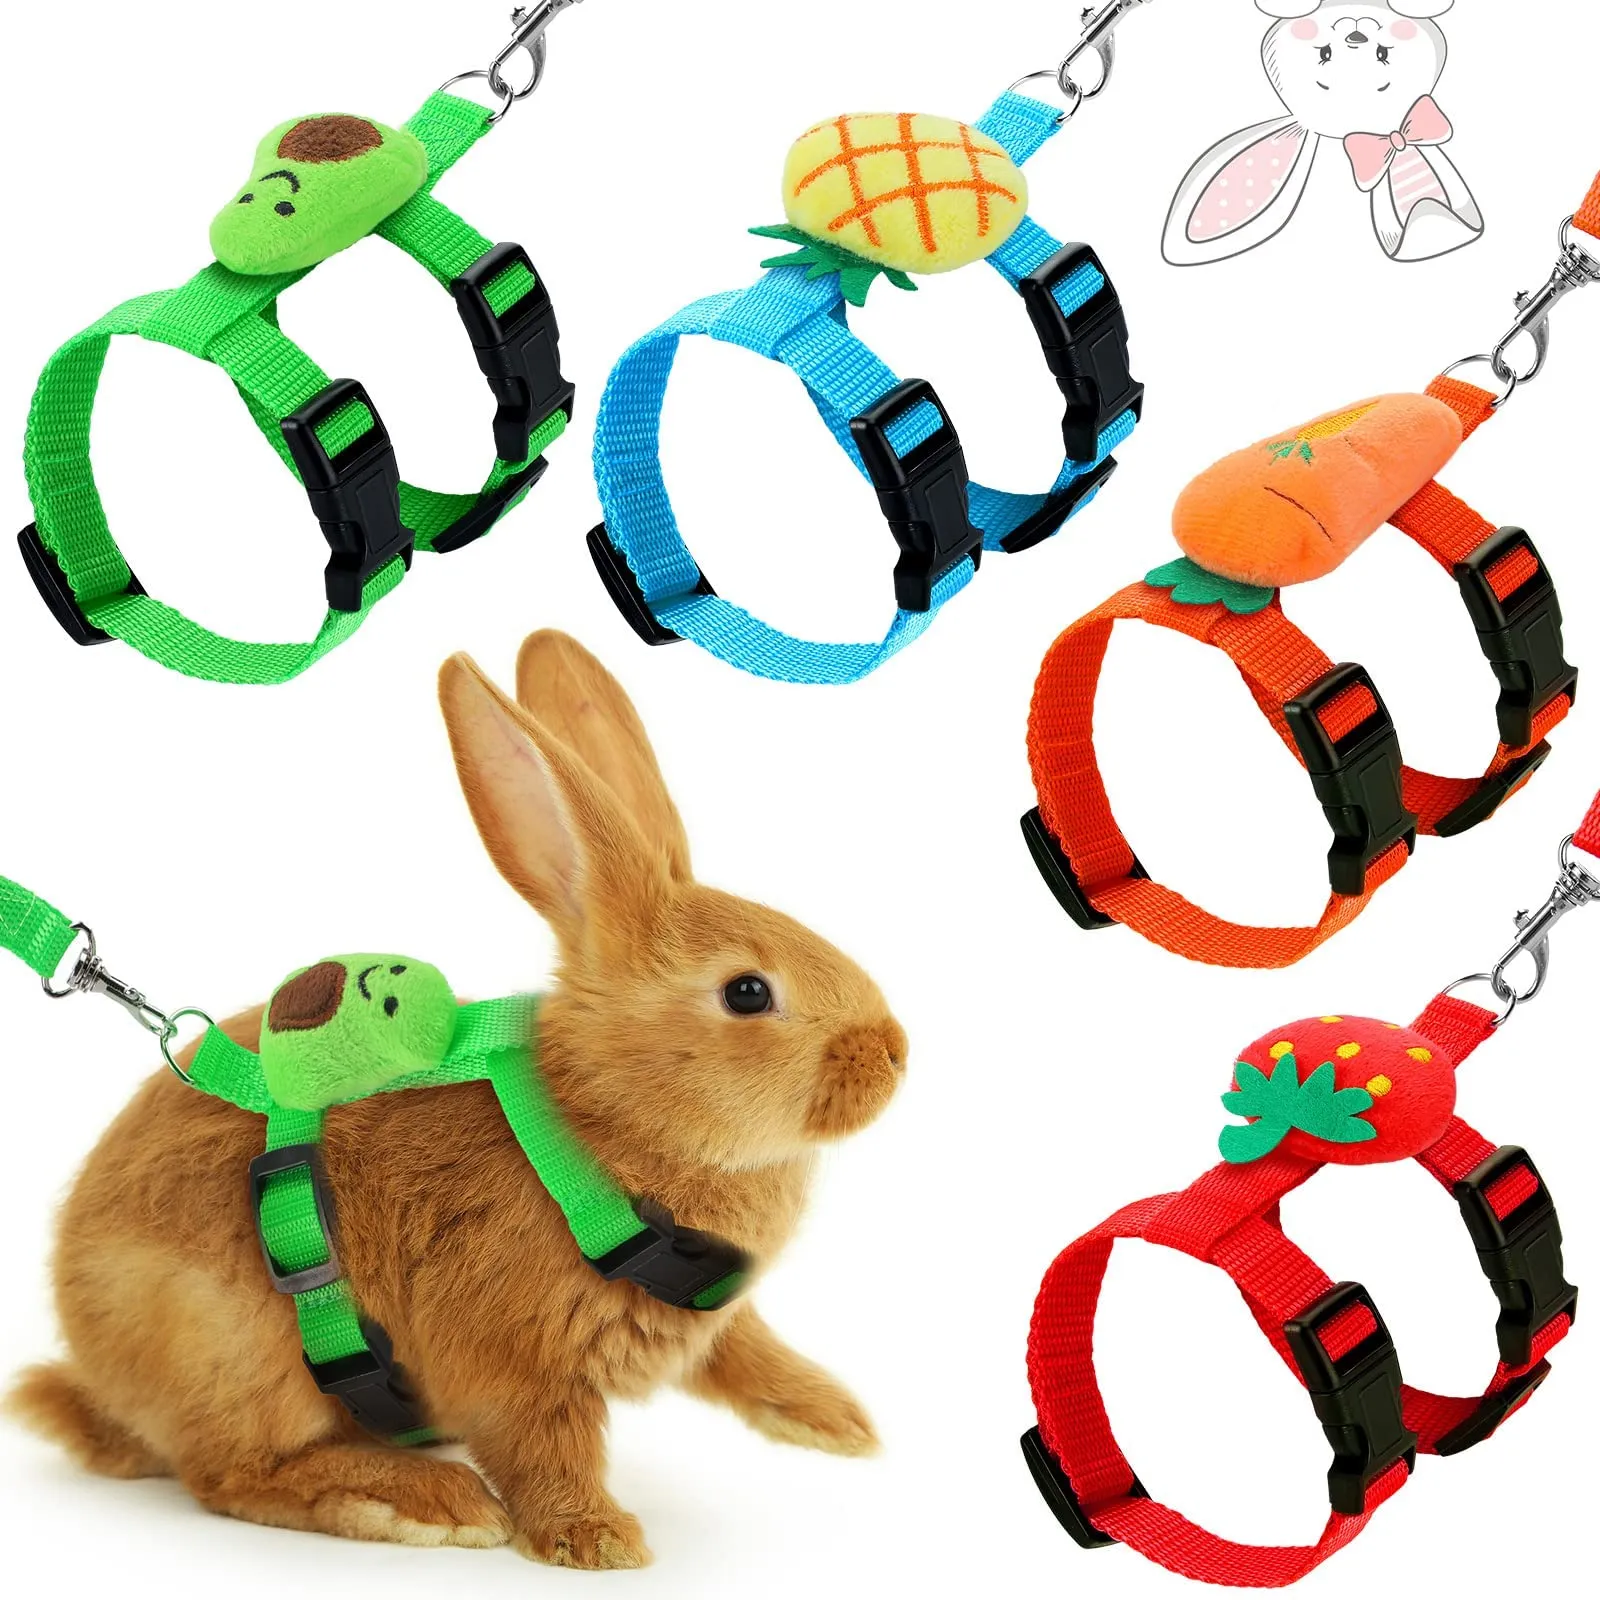 Adjustable Bunny Rabbit Harness and Leash Set Small Pet Cute Vest Harness Leash Ferret Guinea Pig Harness Leash with Decorations for Bunny Kitten Puppy (Fruit)